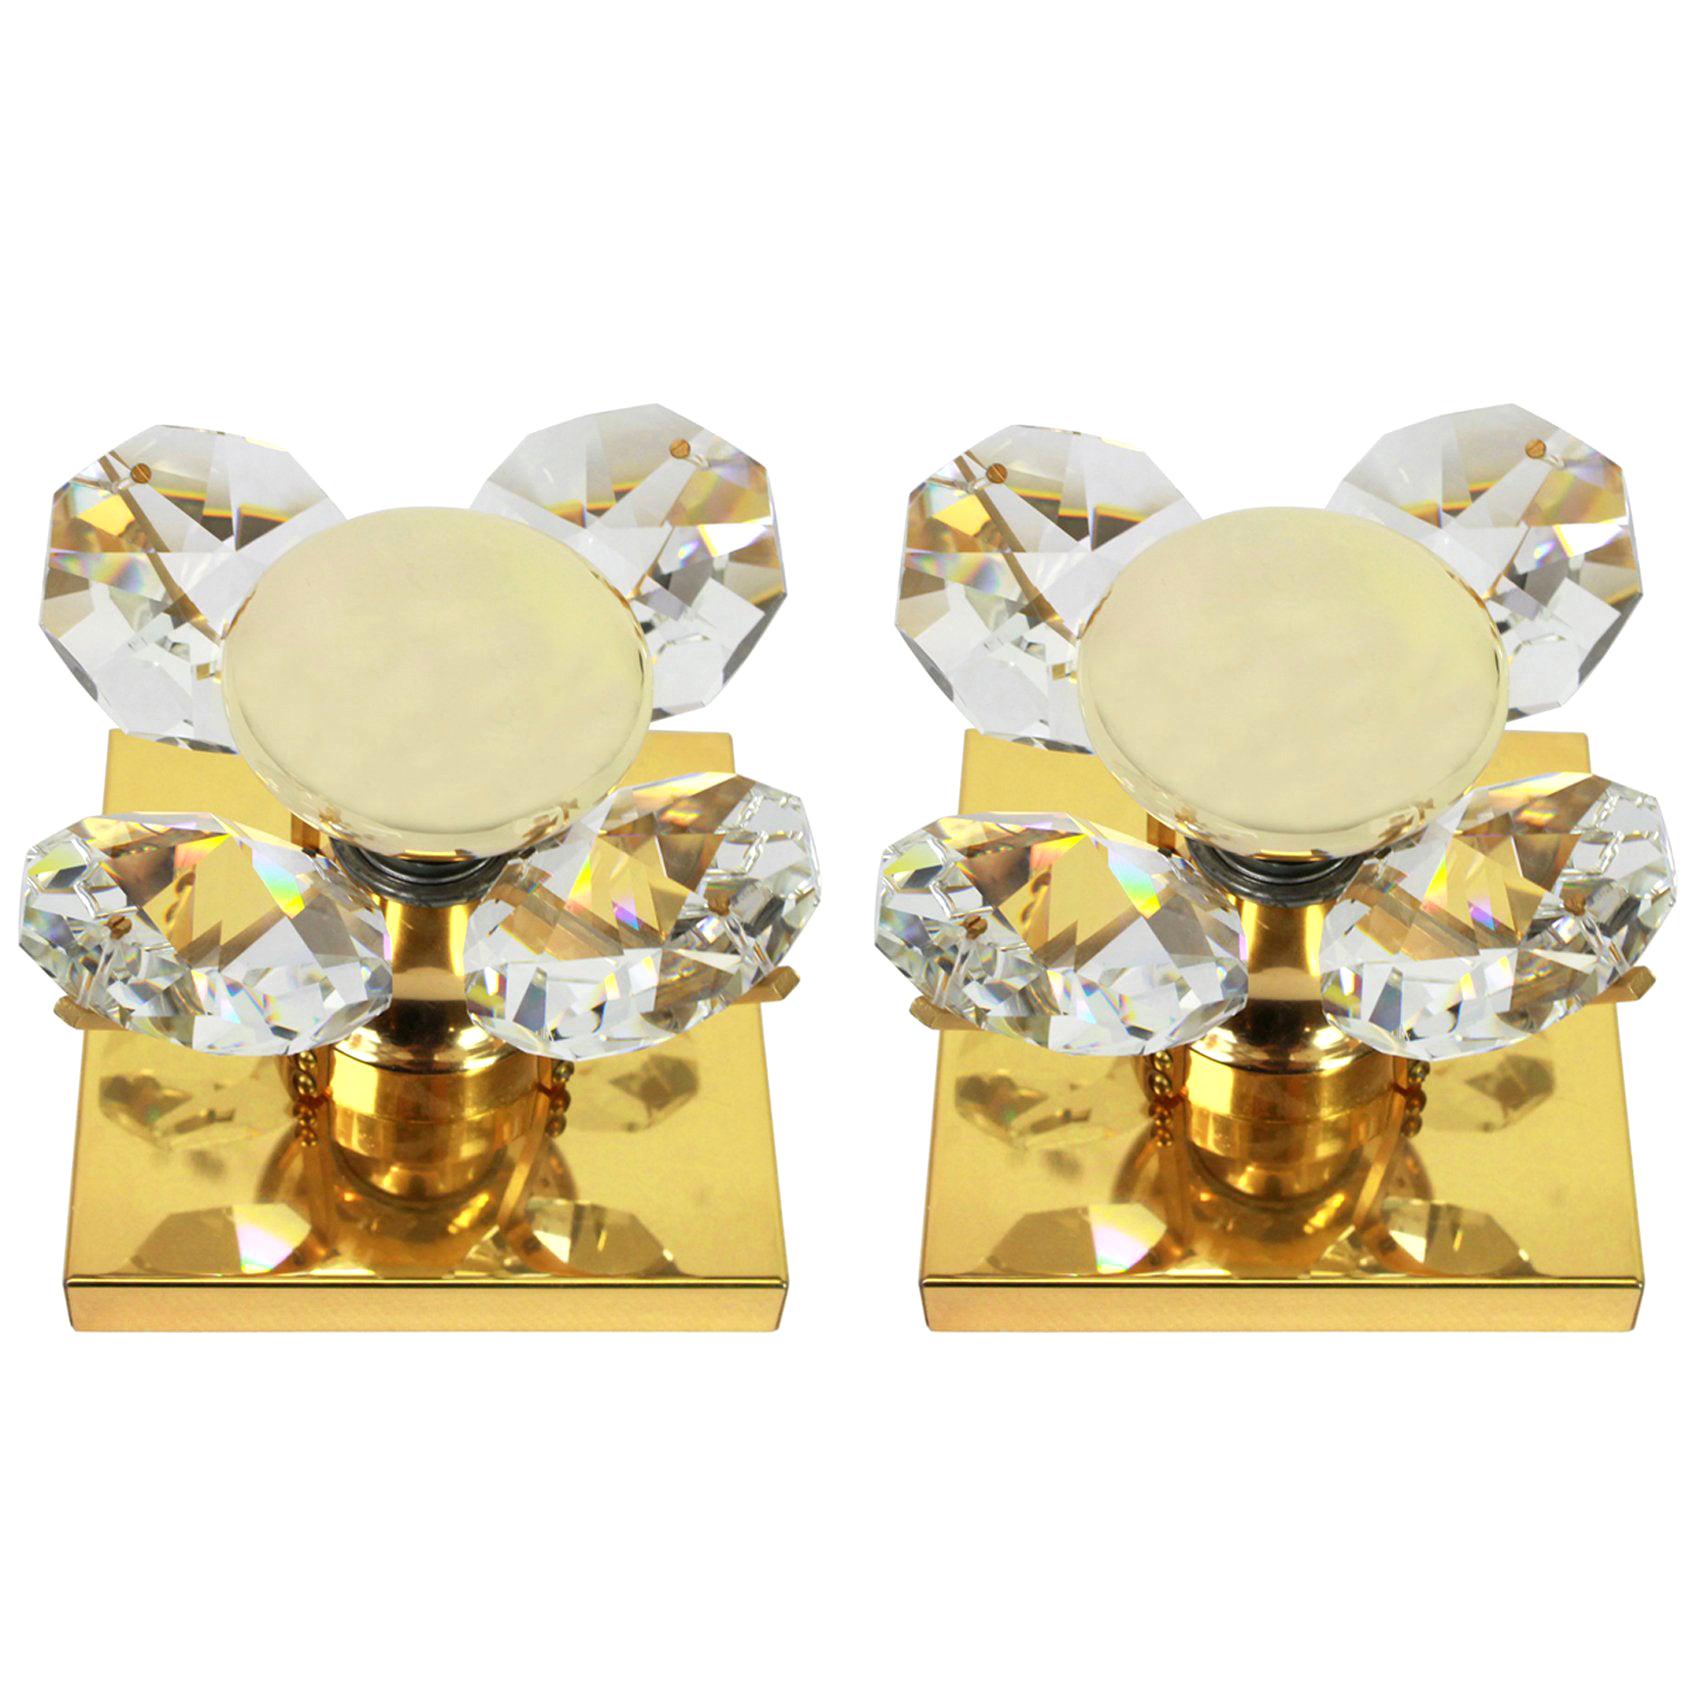 Wonderful Pair of Crystal Flower Sconces by Christoph Palme, Germany, 1970s